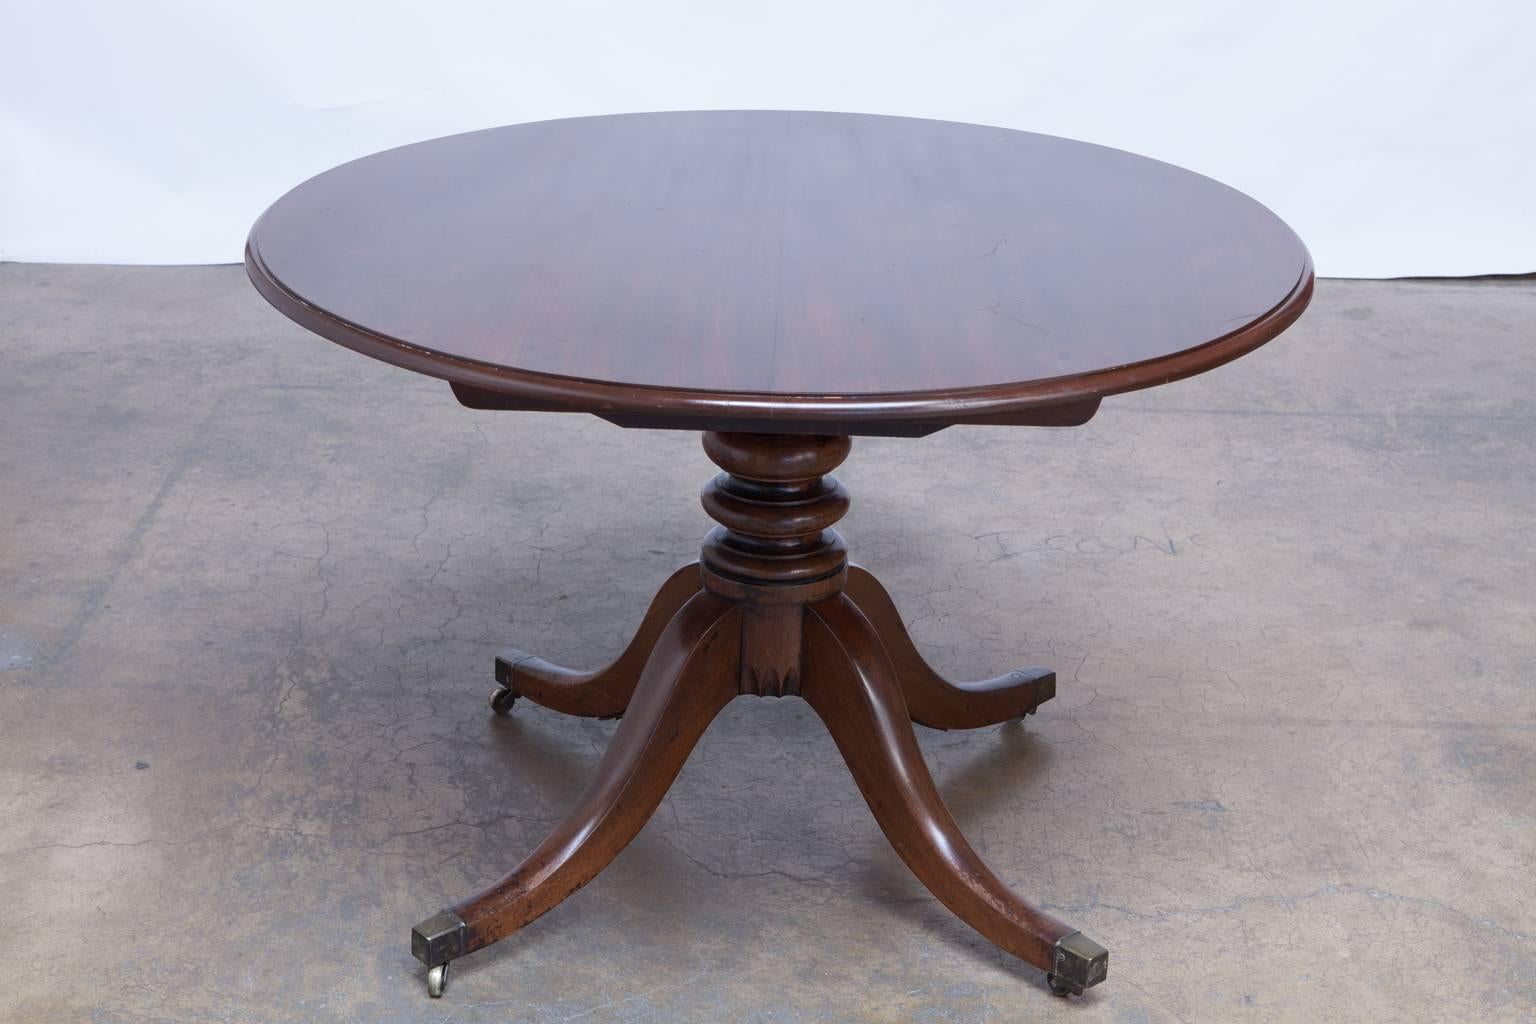 Elegant round tilt-top Mahogany breakfast or dining table made in the George III period. Features four tapering, splayed legs which terminate in brass toe caps and casters supporting a lovely turned pedestal. All original tilt mechanism hardware